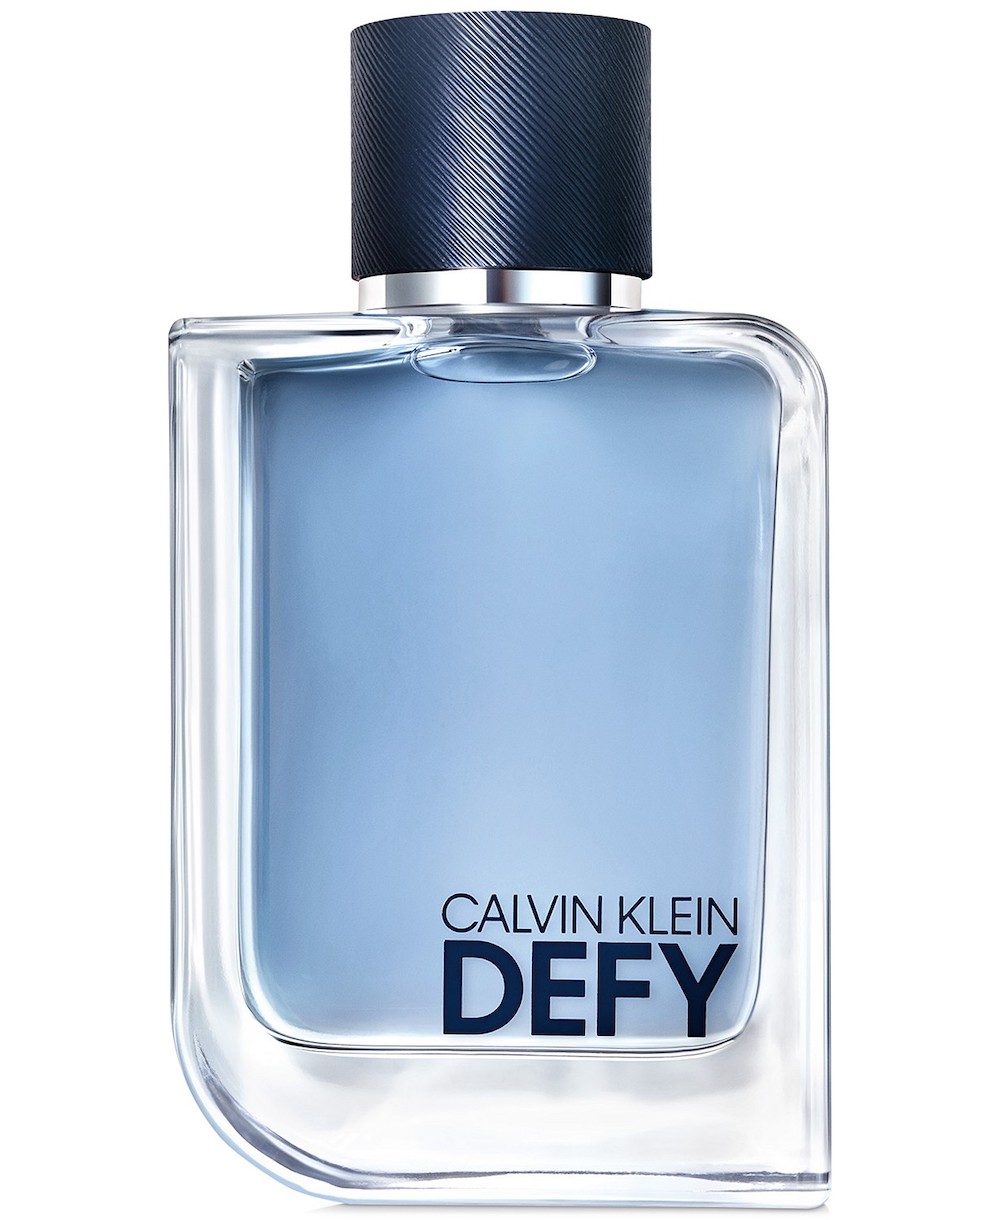 Men's Fragrances for Women to Try - theFashionSpot